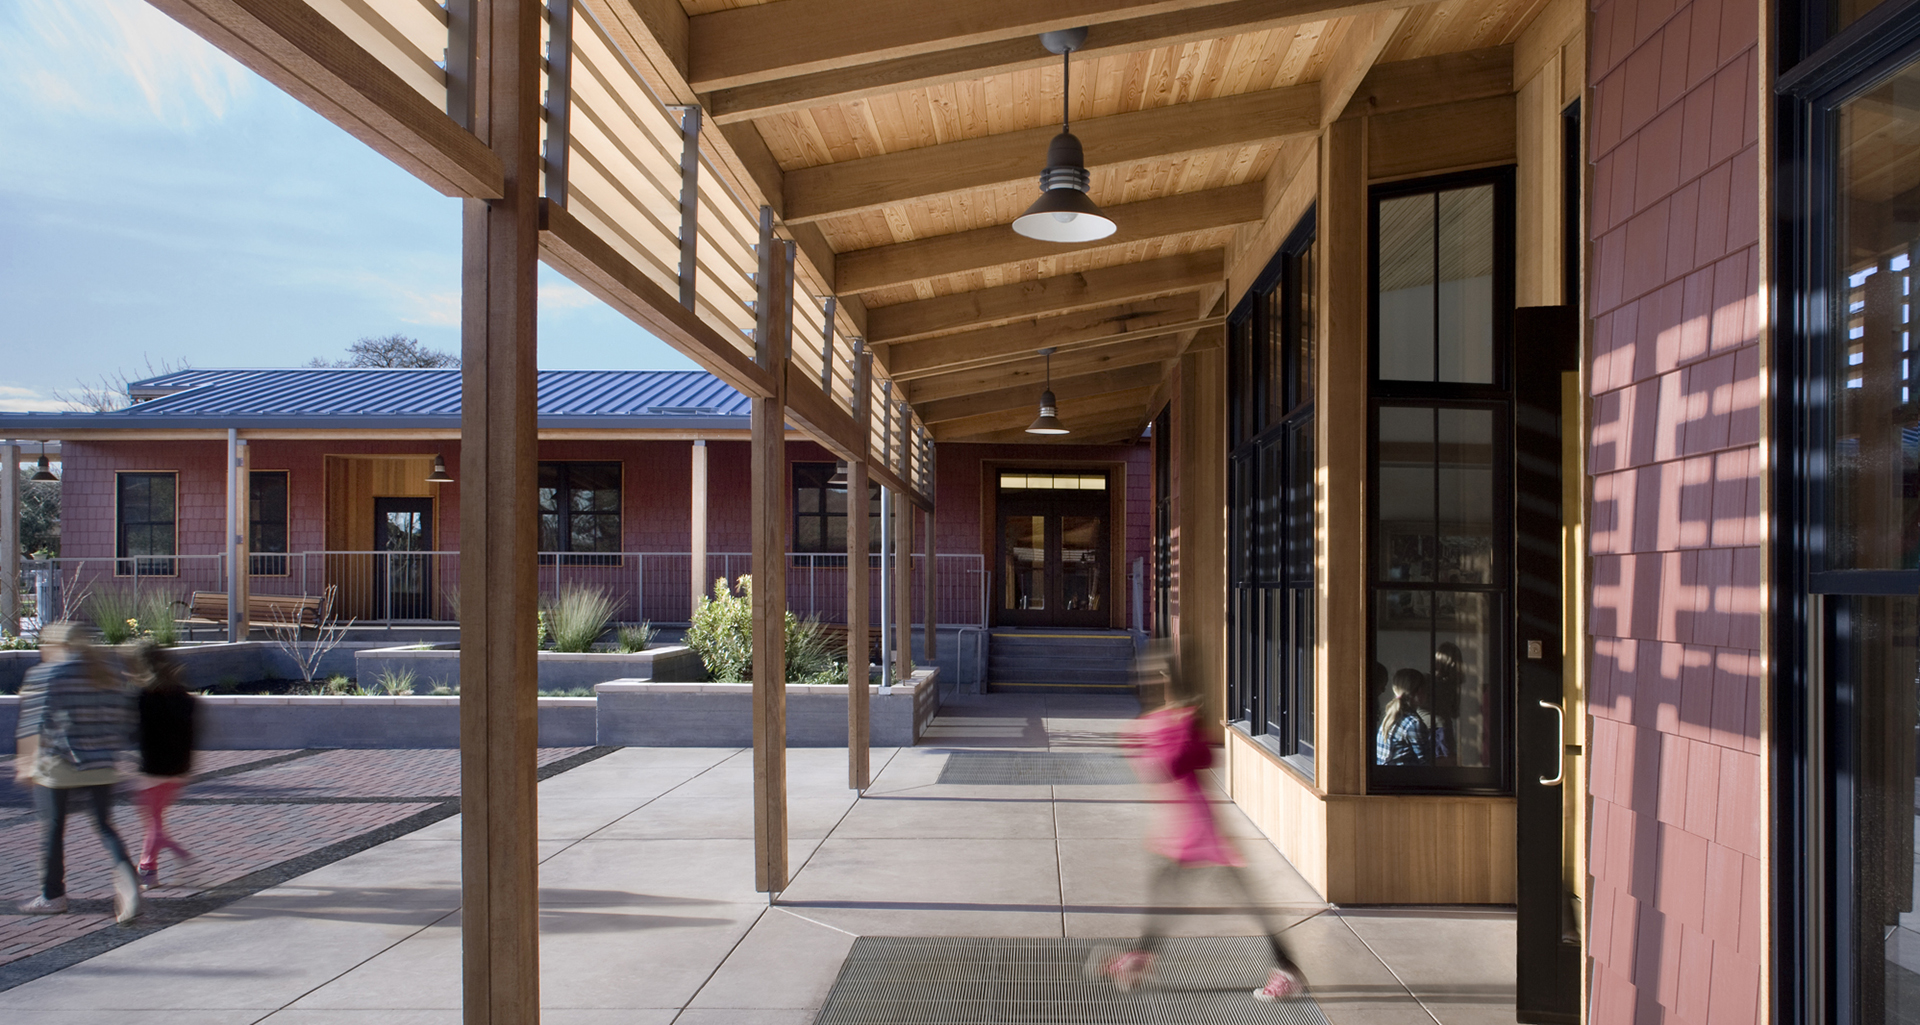 Yountville Town Center & Library | Photos by David Wakely